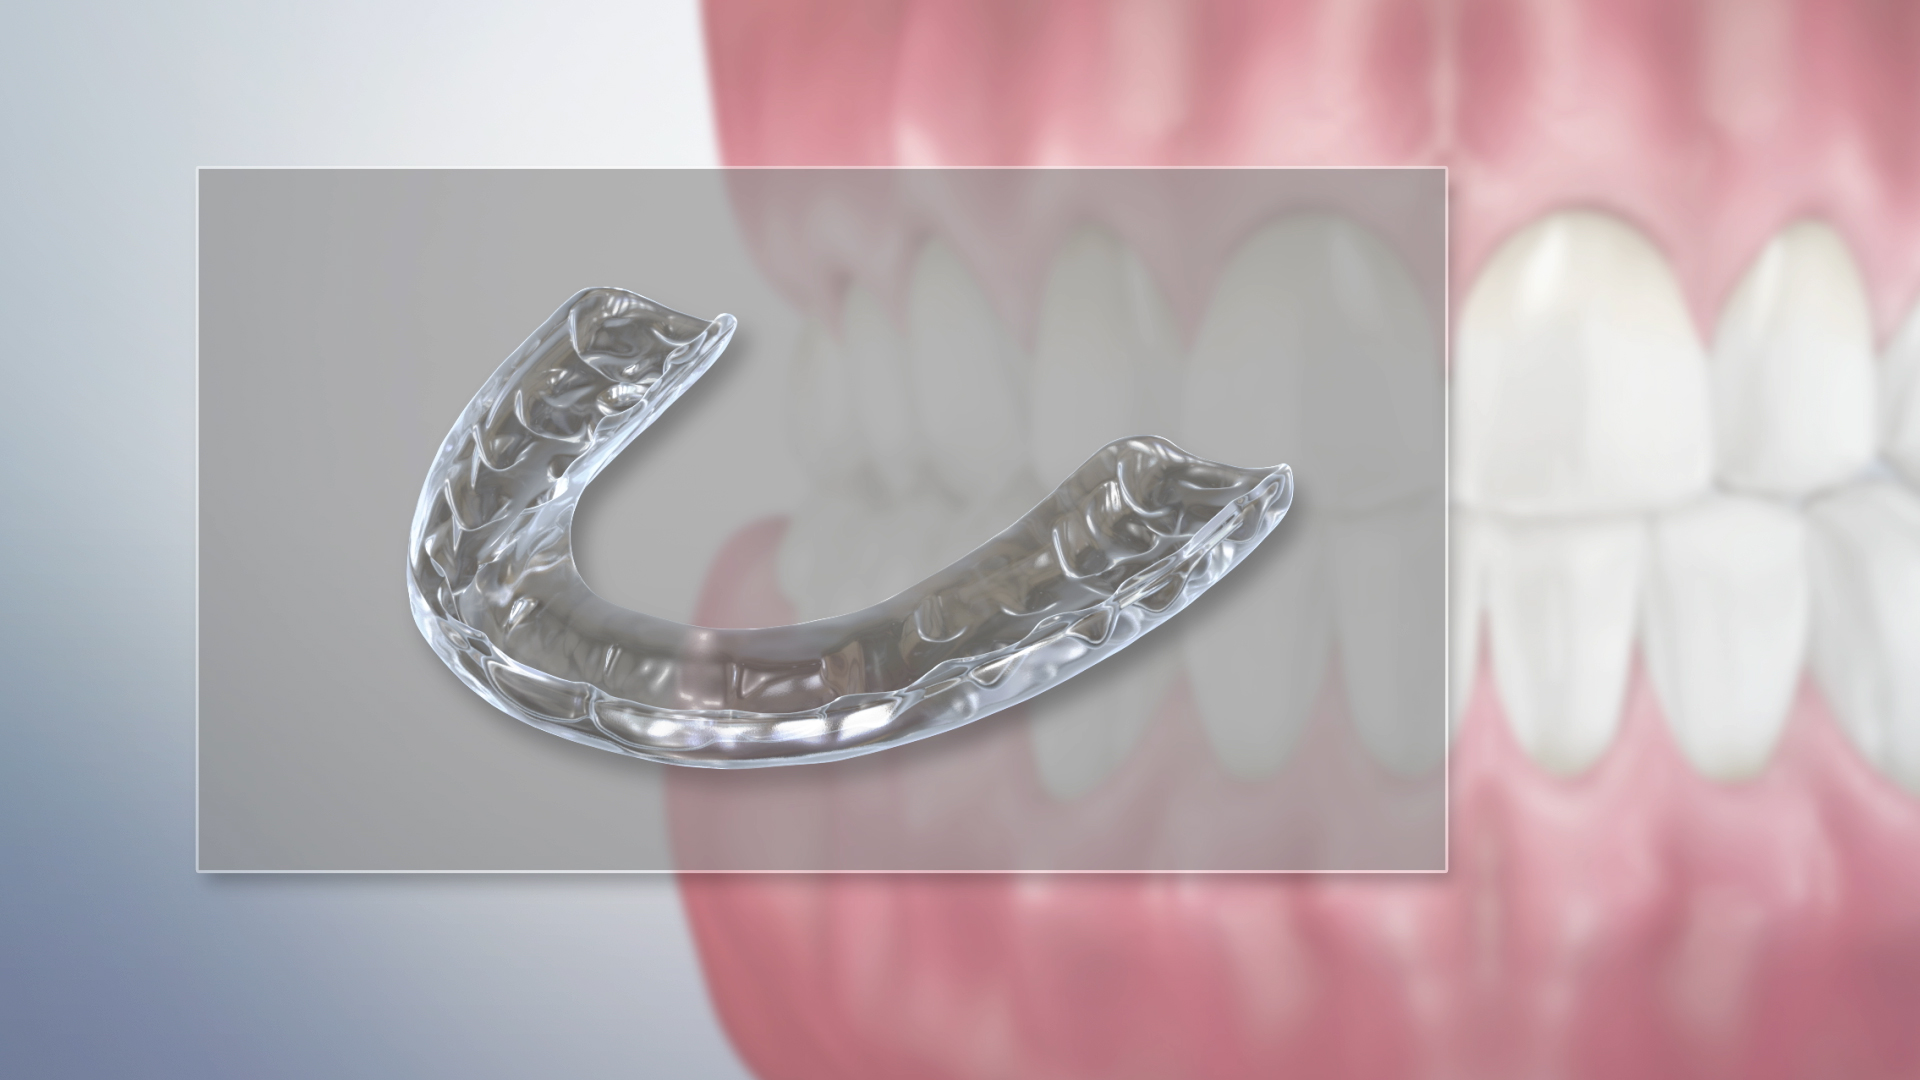 Thumbnail for a video on Occlusal Appliance for Tooth Wear